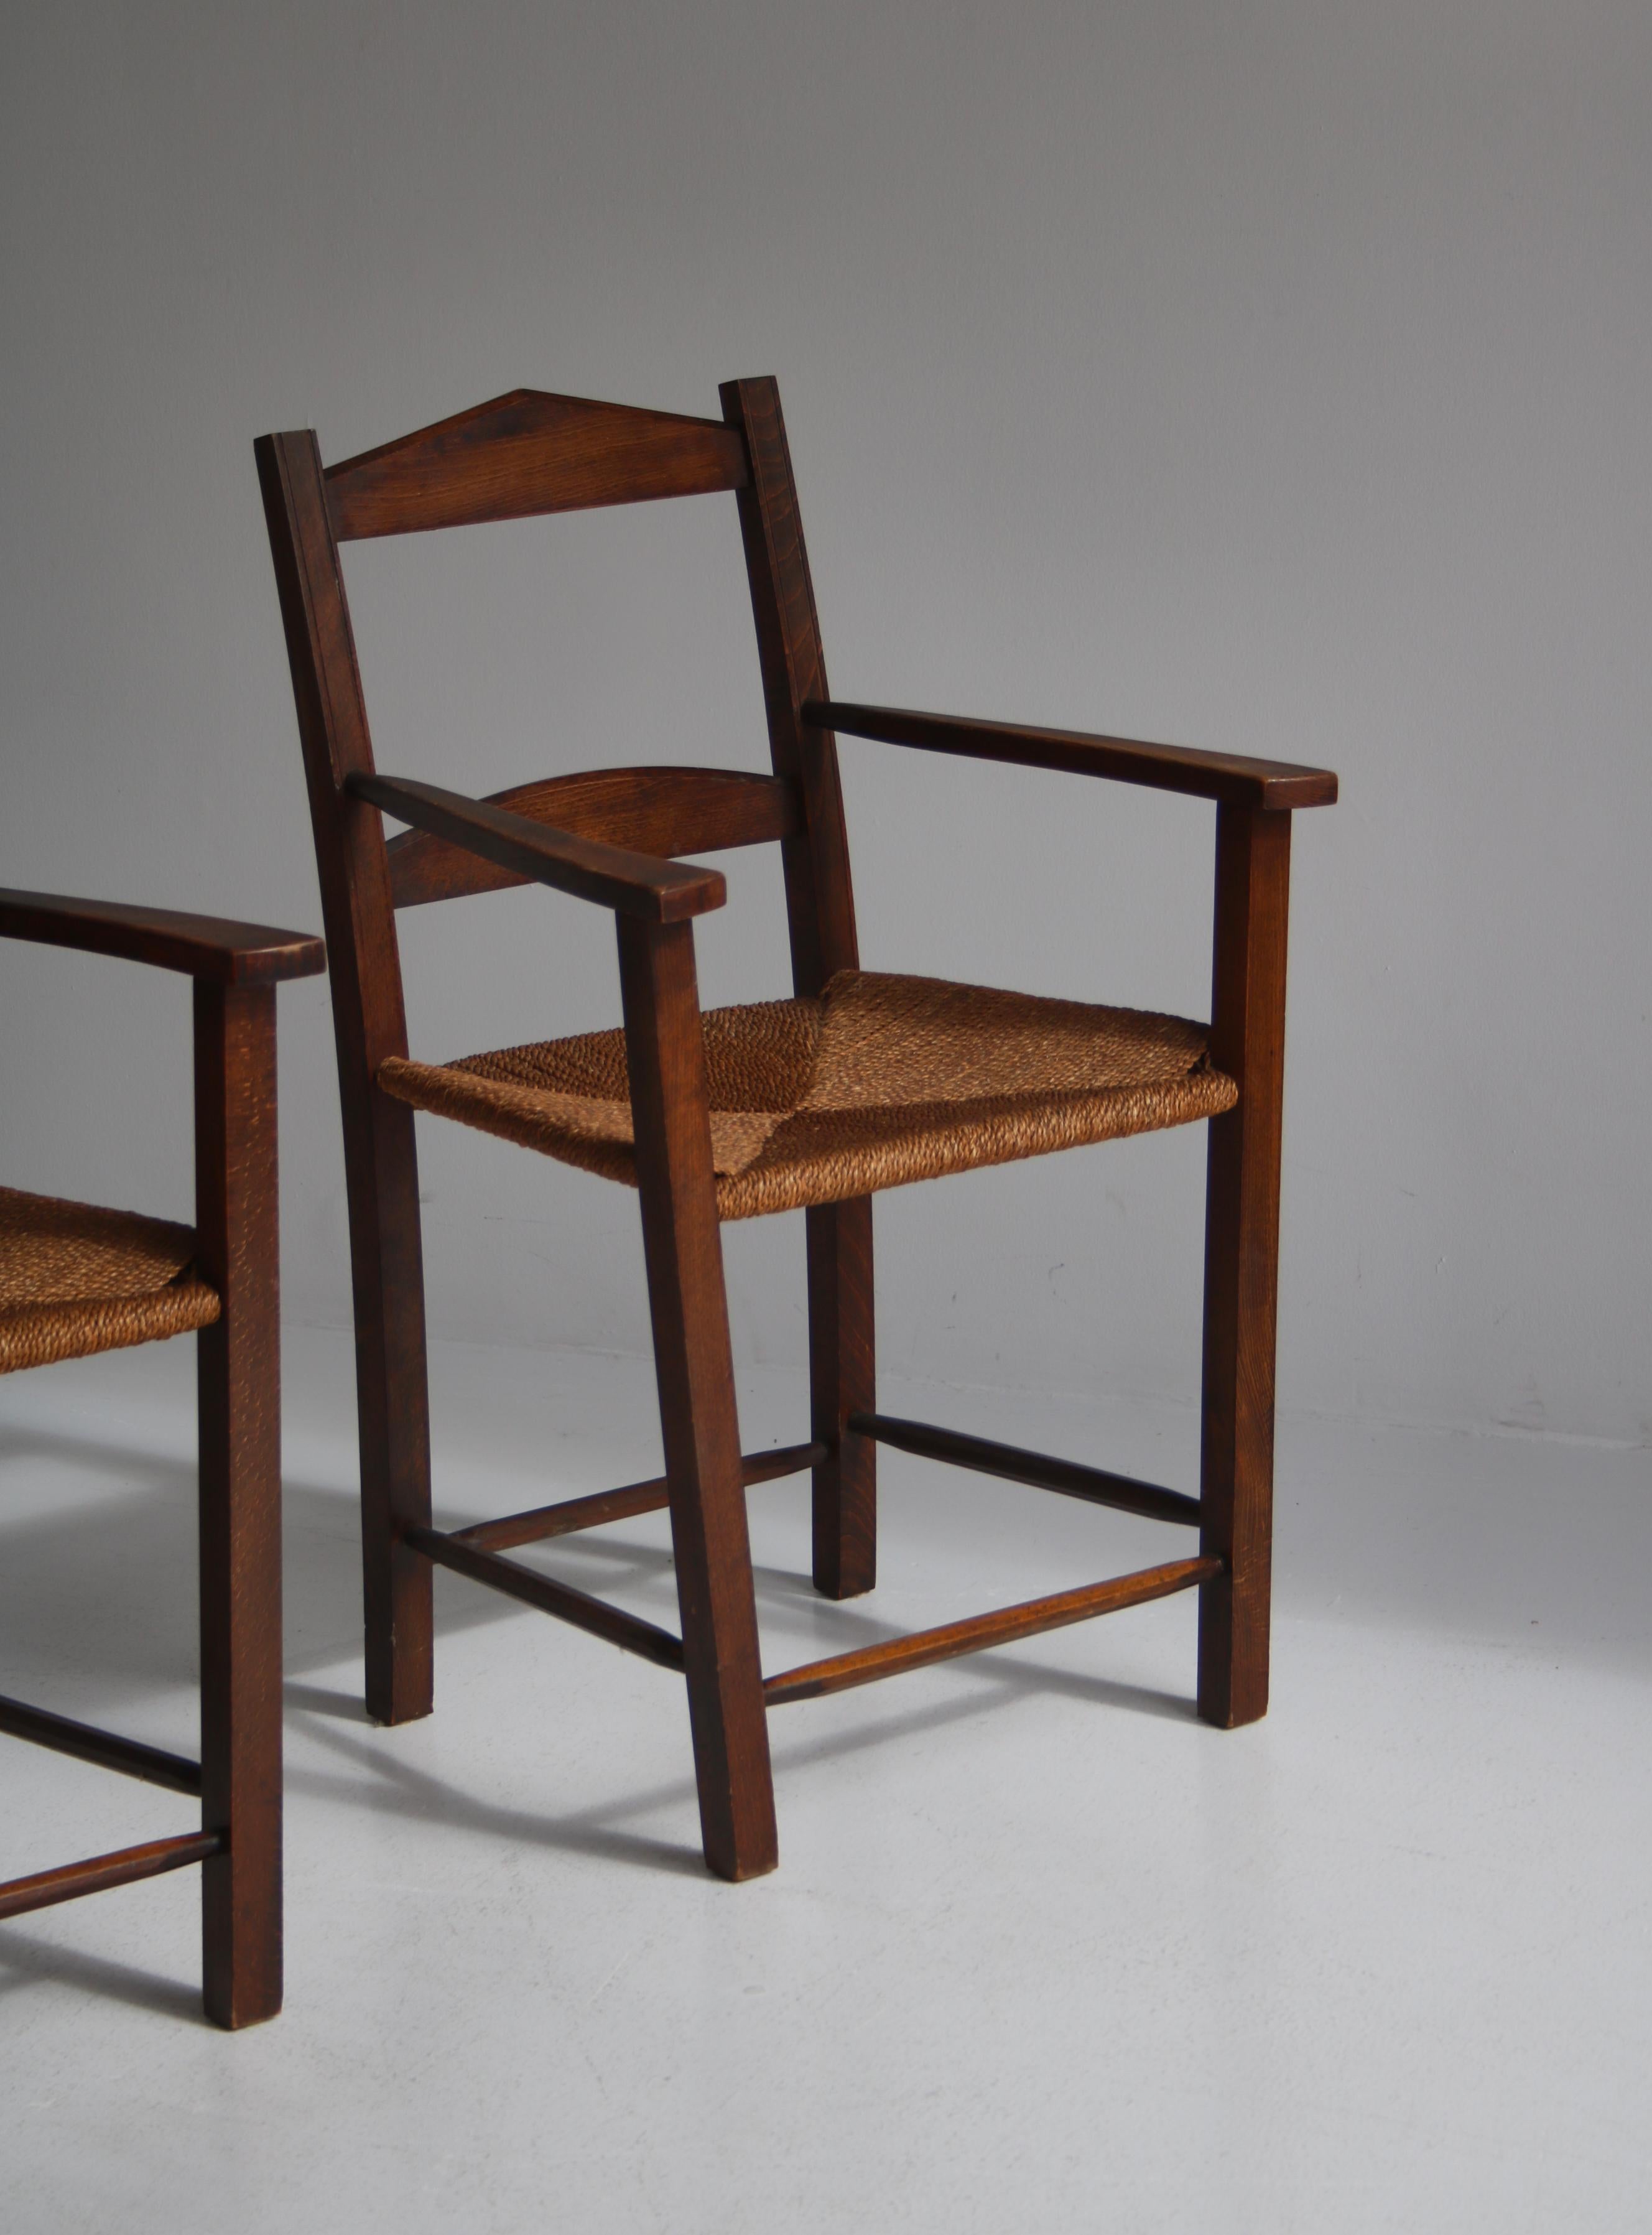 Mid-20th Century Pair of Armchairs in Dark Stained Pine and Seagrass Danish Cabinetmaker, 1940s For Sale